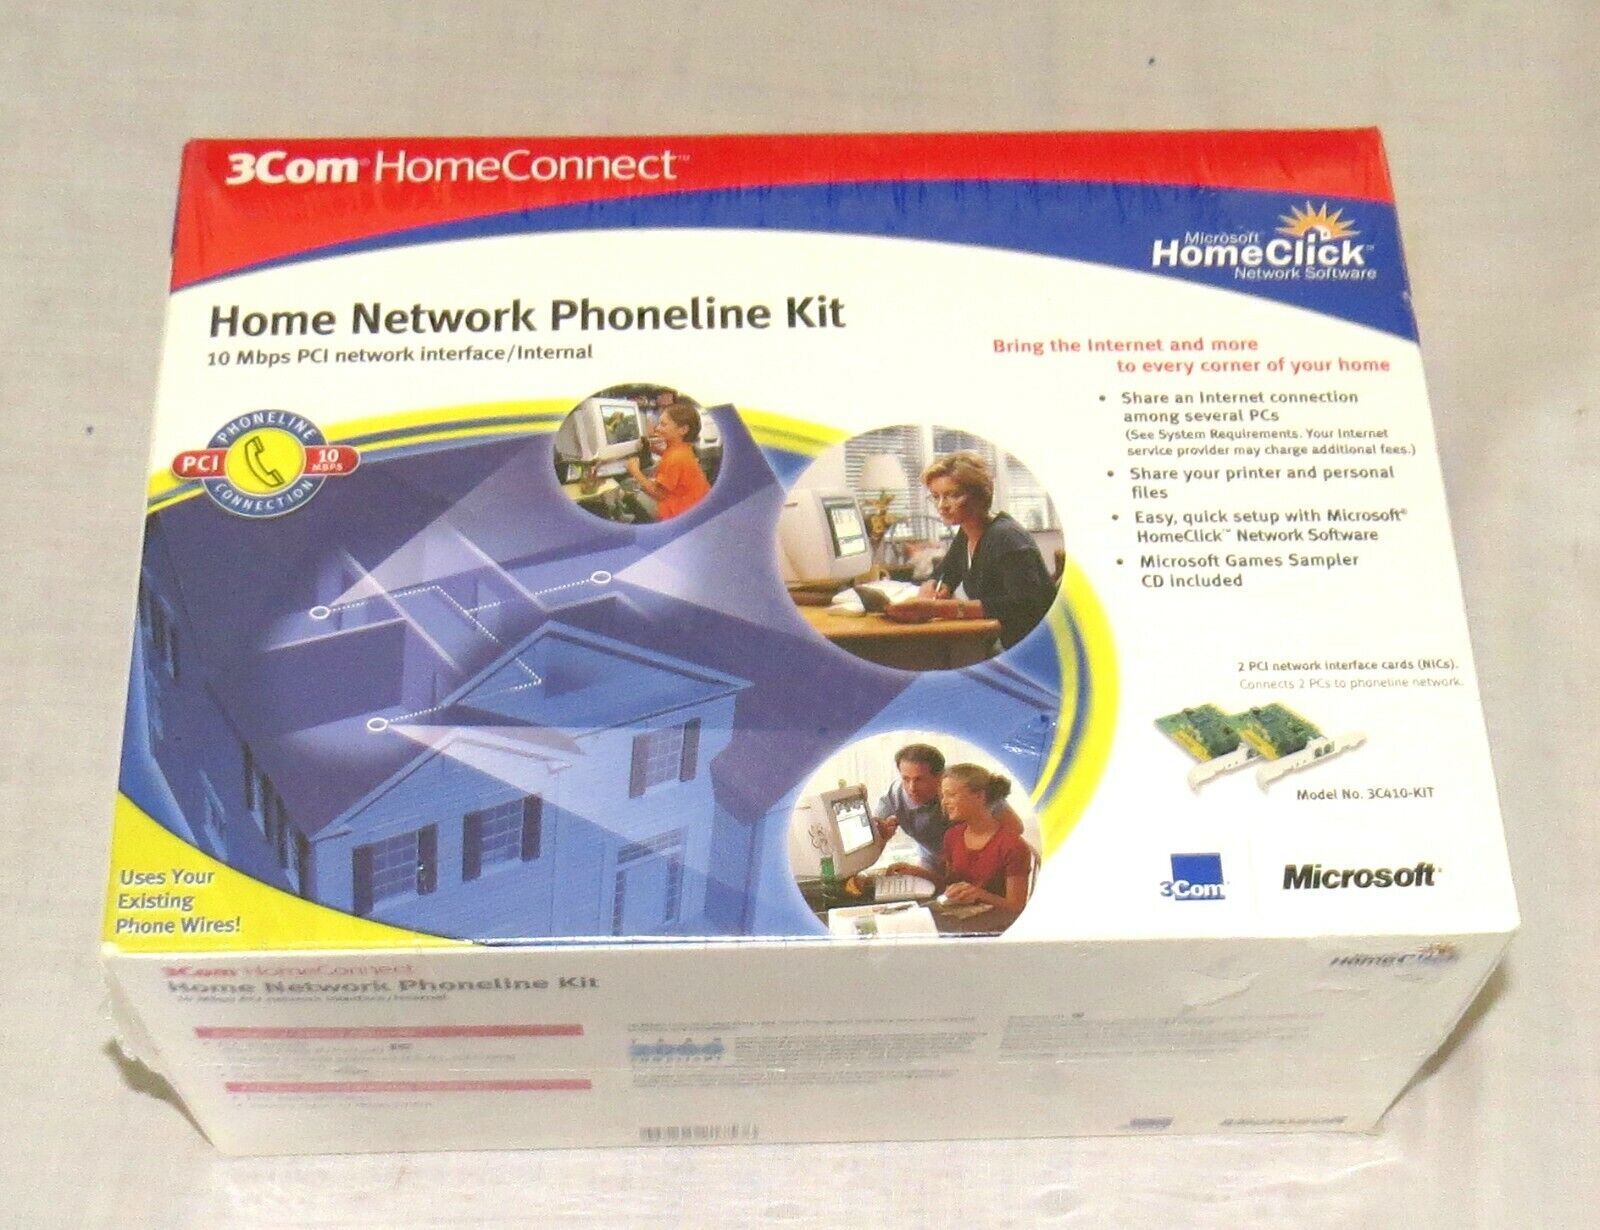 3Com Home Connect Home Network Phoneline Kit - NEW